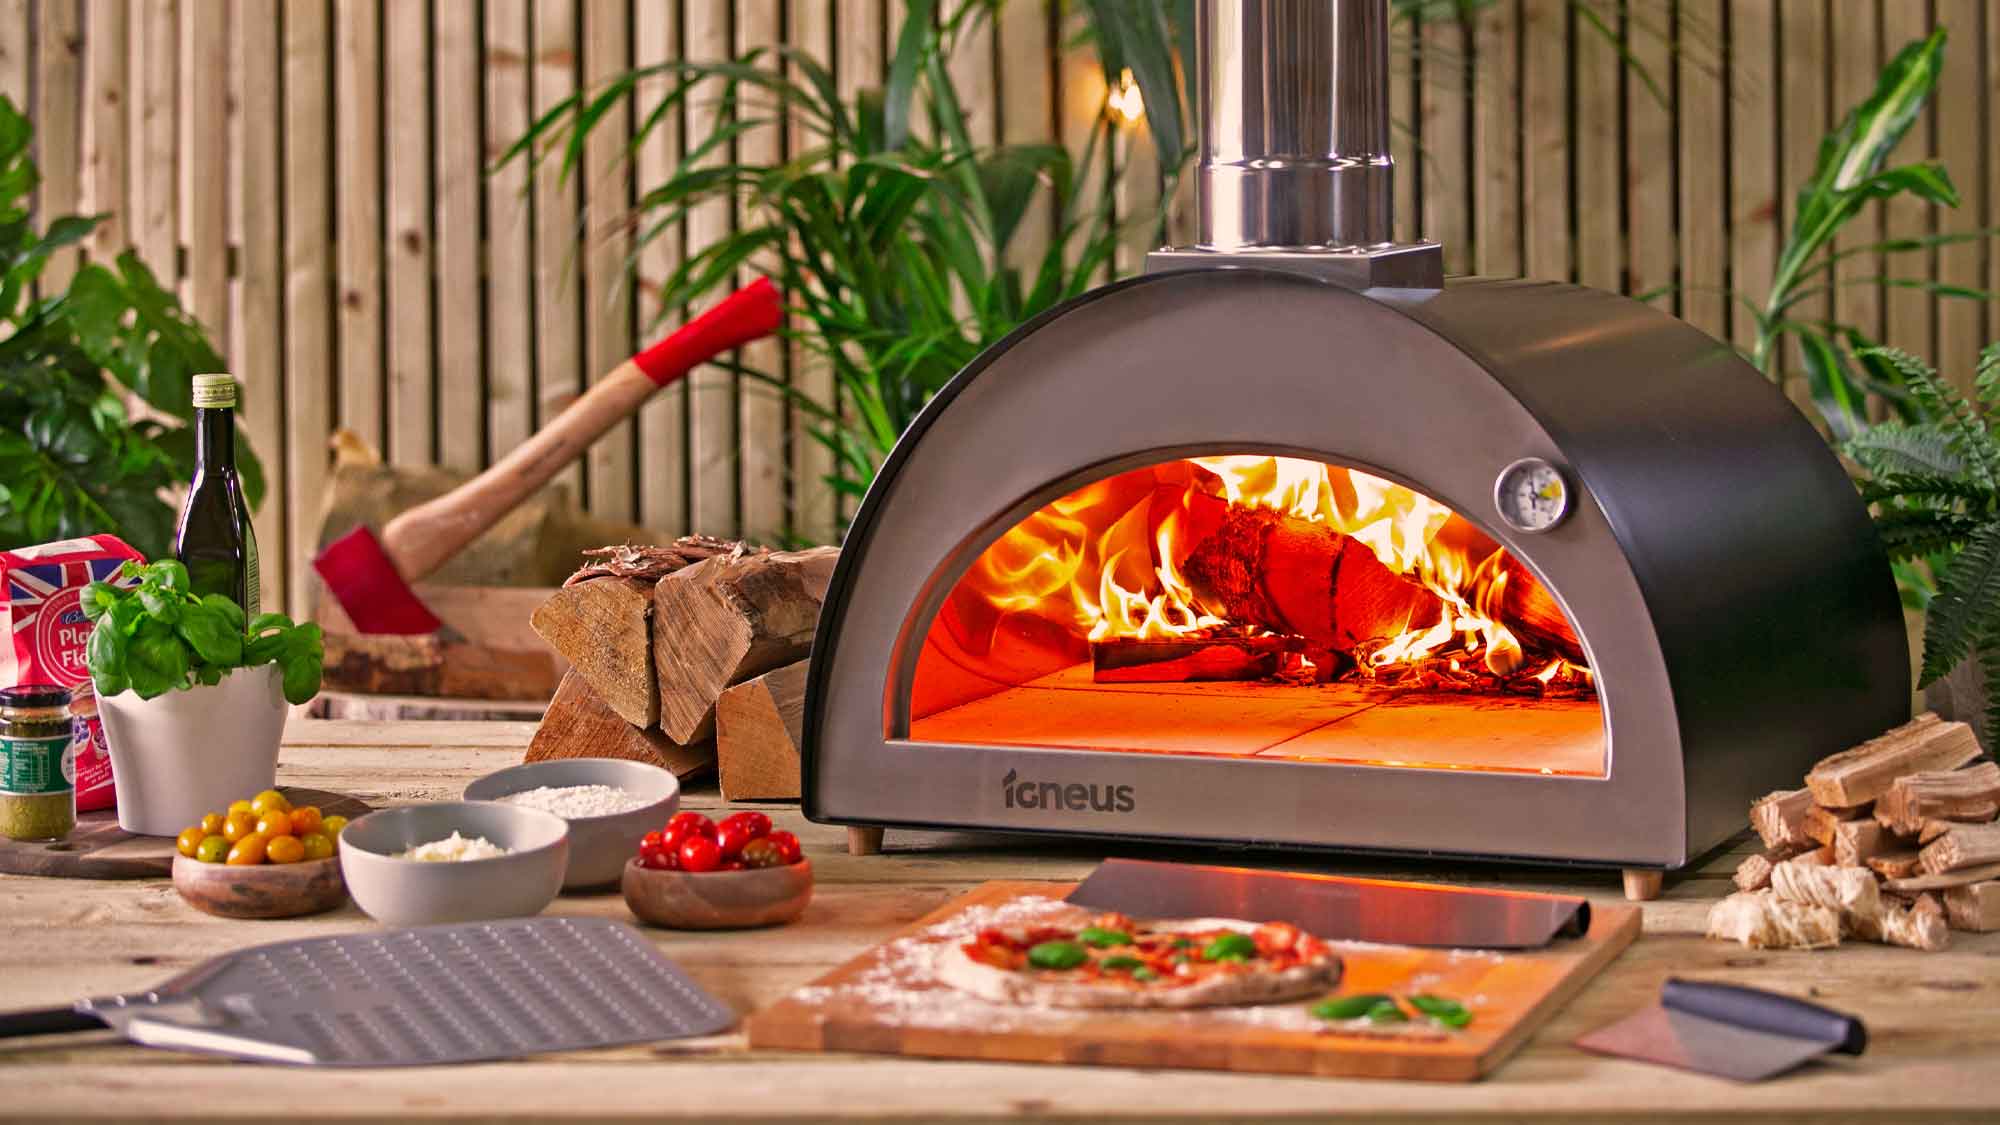 an Igneus wood fired pizza oven ready to cook a pizza